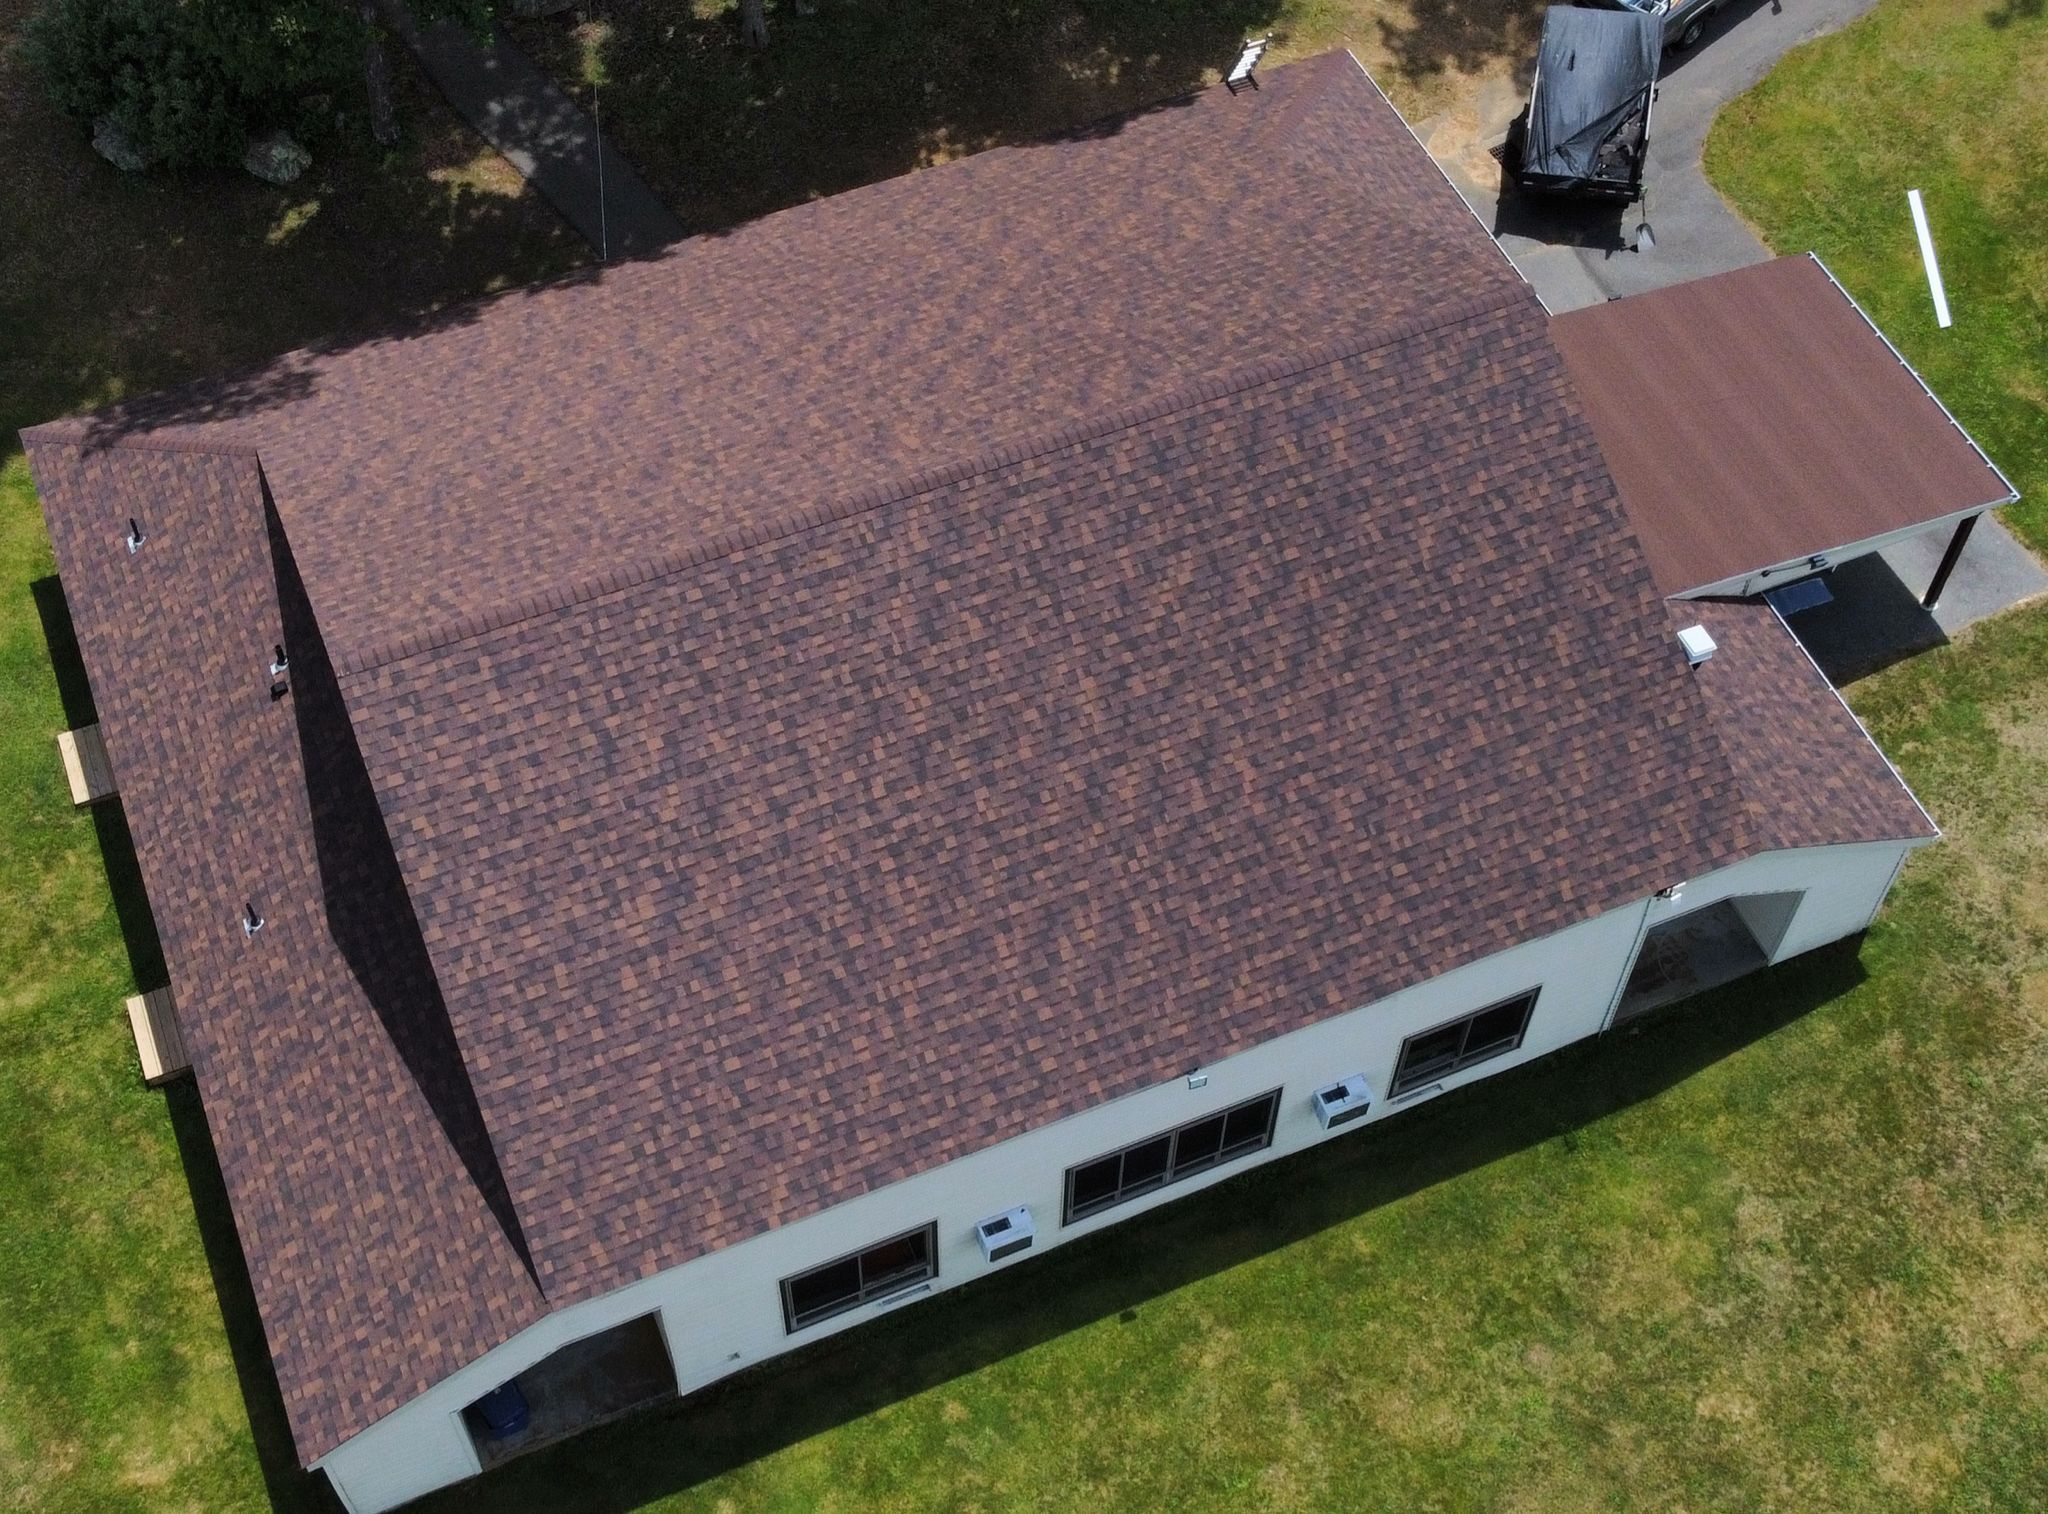 An overhead view of a Conneticut home with a new red asphalt shingle roof installed by Hammerhead Roofing